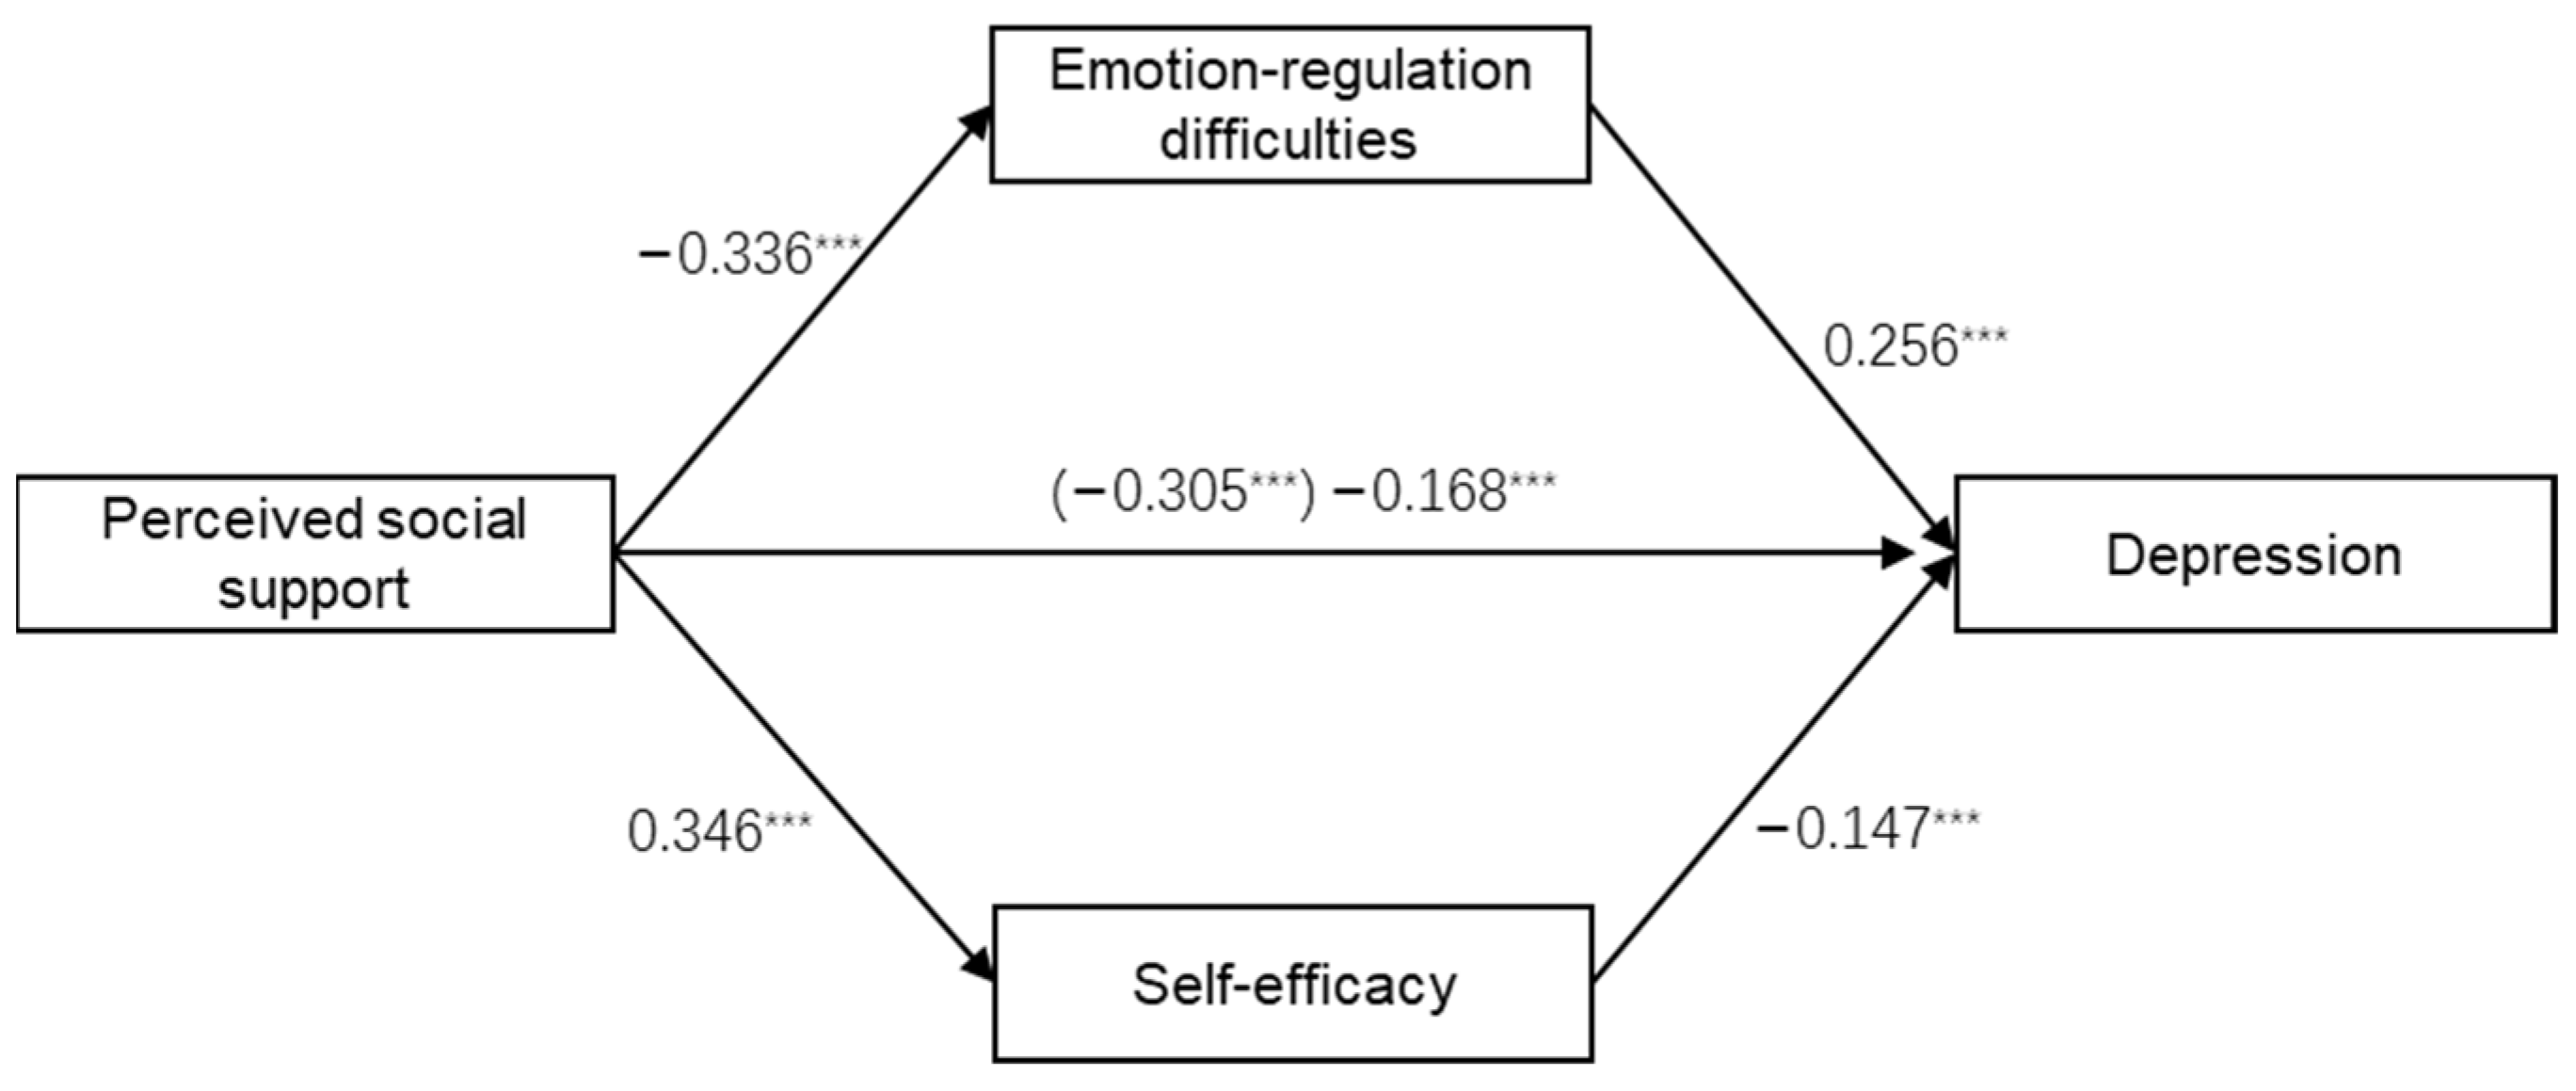 IJERPH | Free Full-Text | Depression and Perceived Social Support among  Unemployed Youths in China: Investigating the Roles of Emotion-Regulation  Difficulties and Self-Efficacy